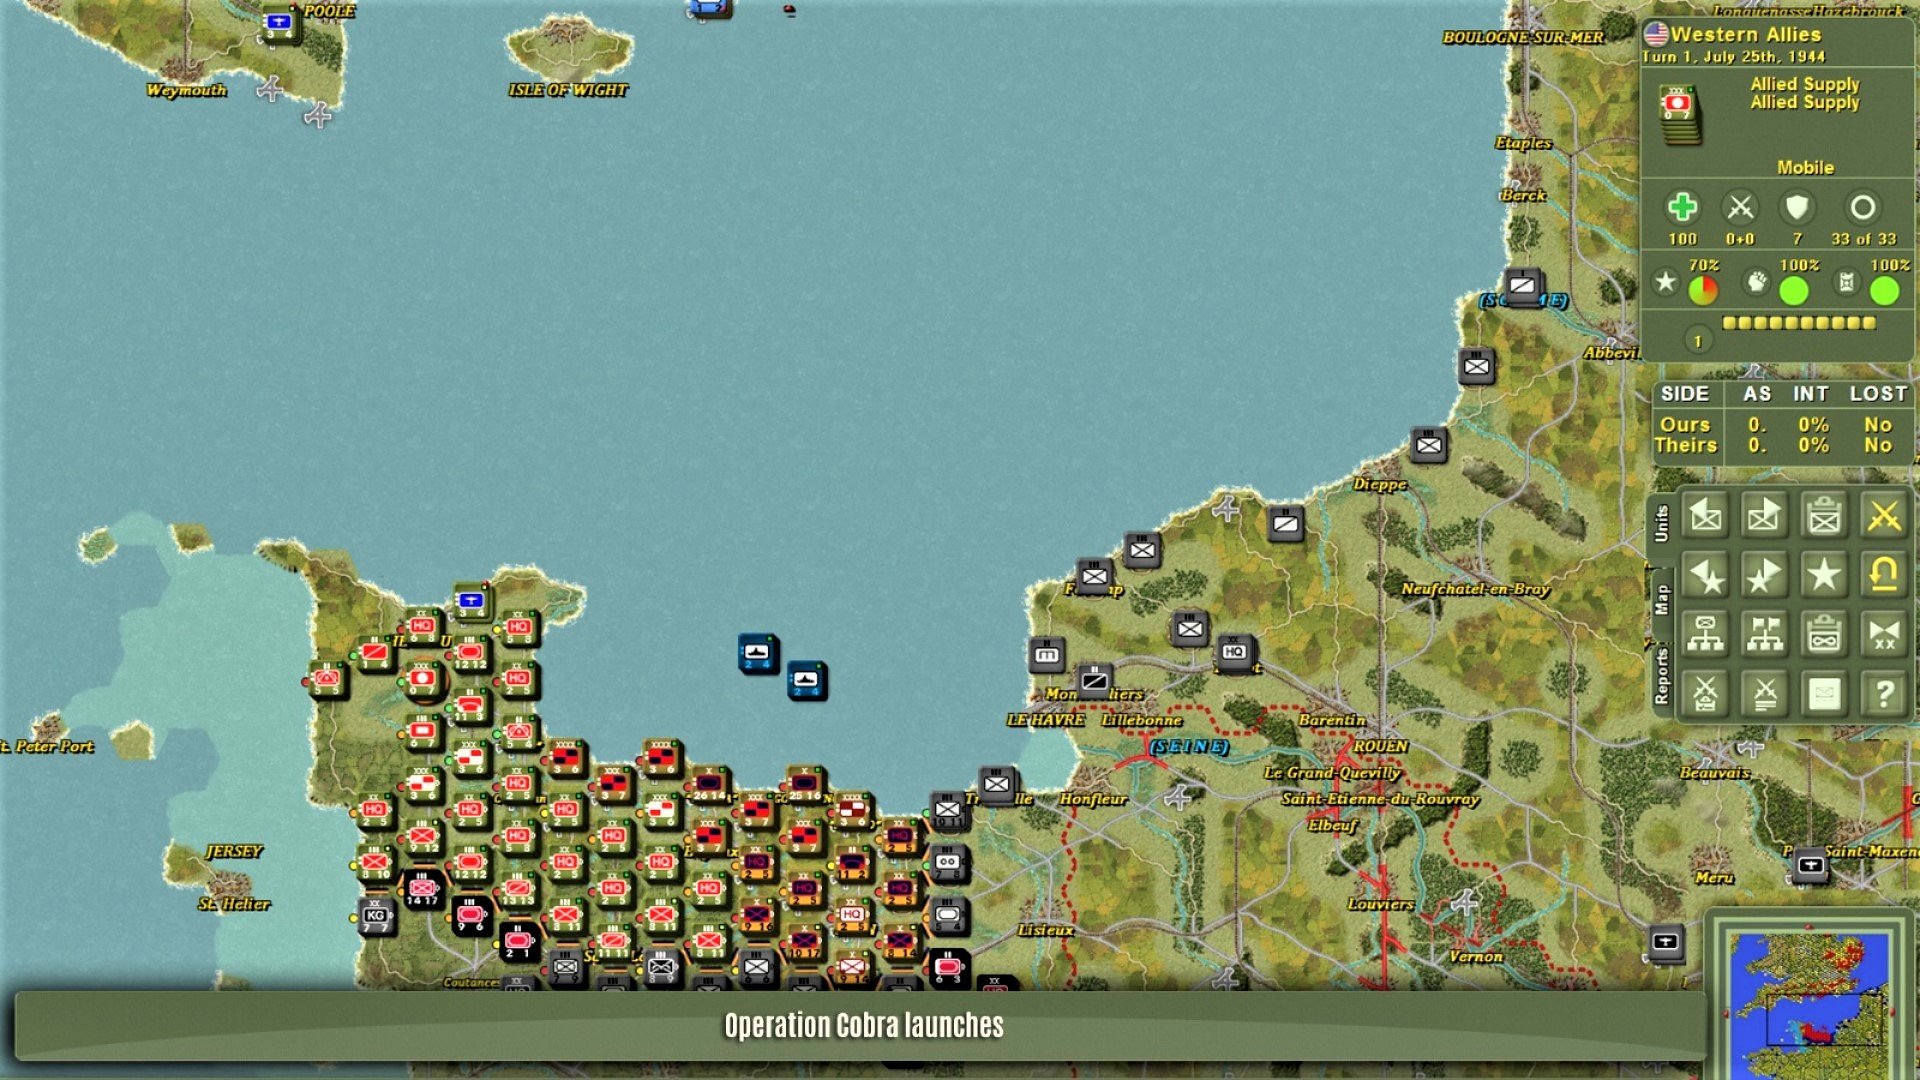 Best WW2 games - screenshot from The Operational Art of War 4 showing multiple unit markers on a map of Normandy